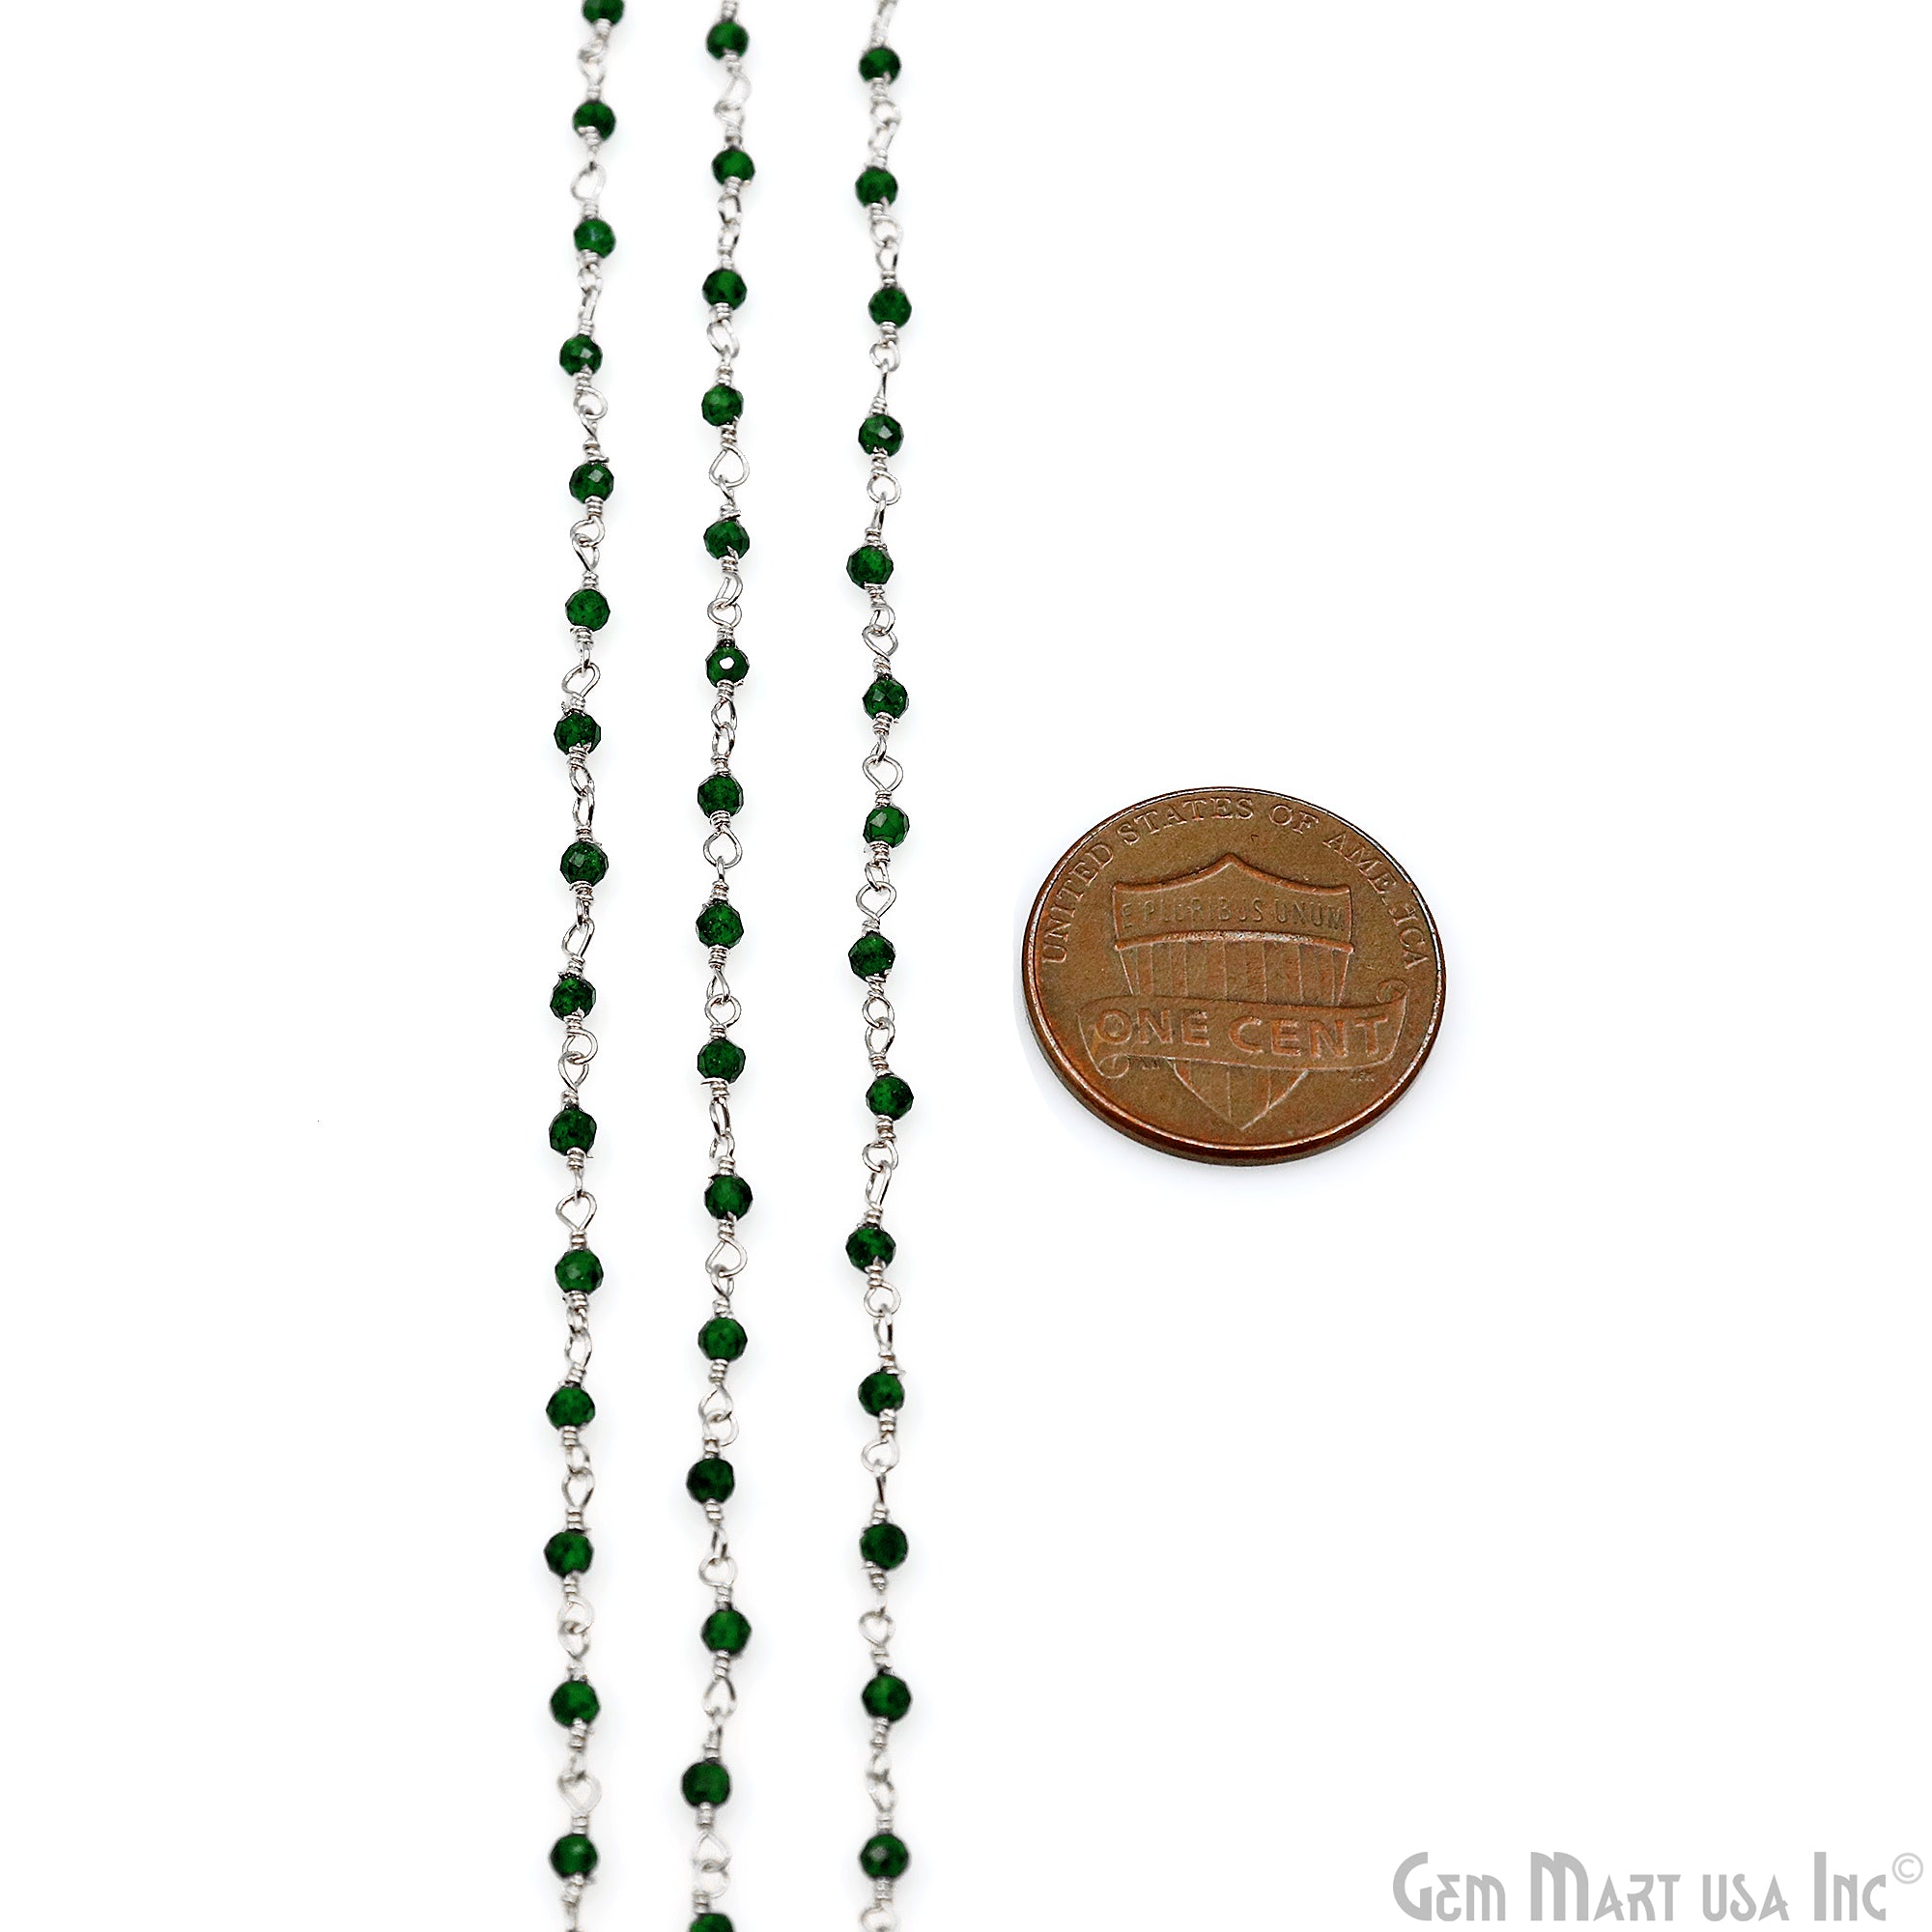 Green Zircon 2-2.5mm Tiny Beads Gold Plated Wire Wrapped Rosary Chain